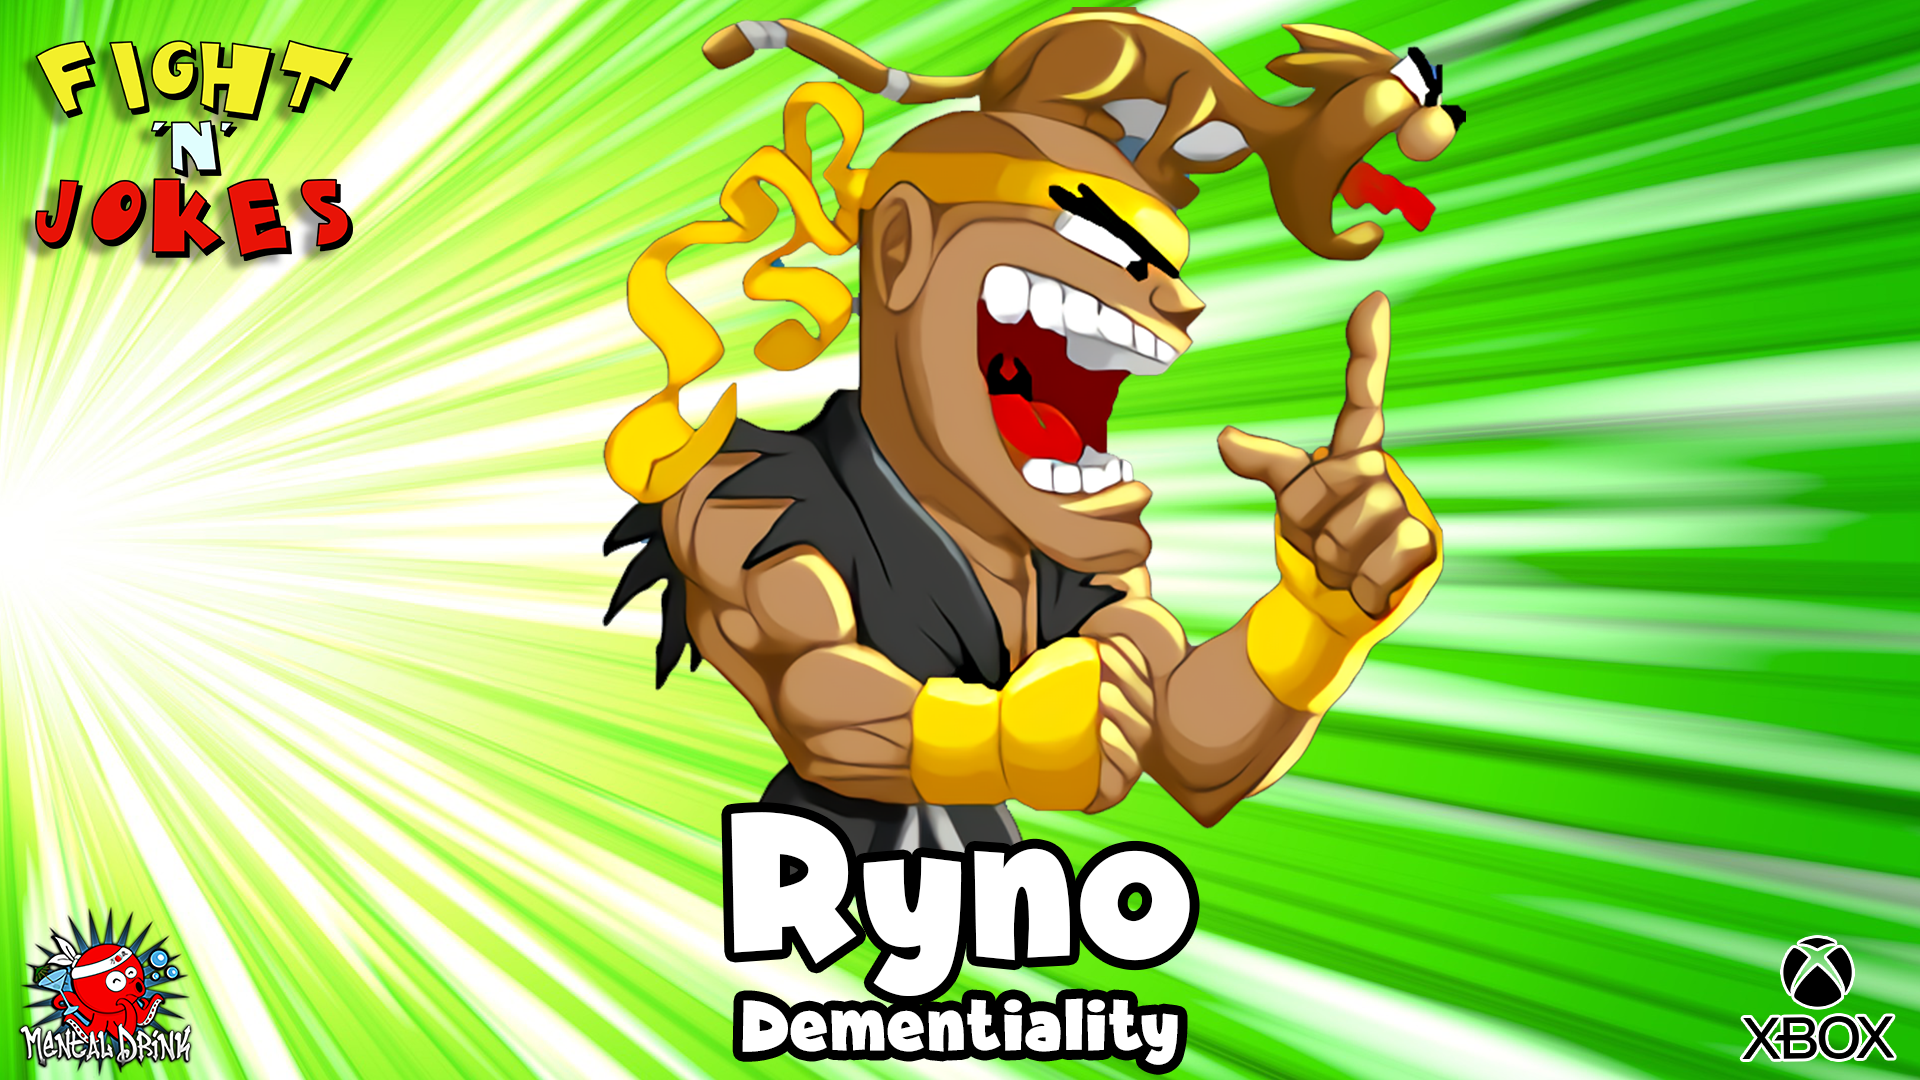 Icon for Dementiality - Ryno